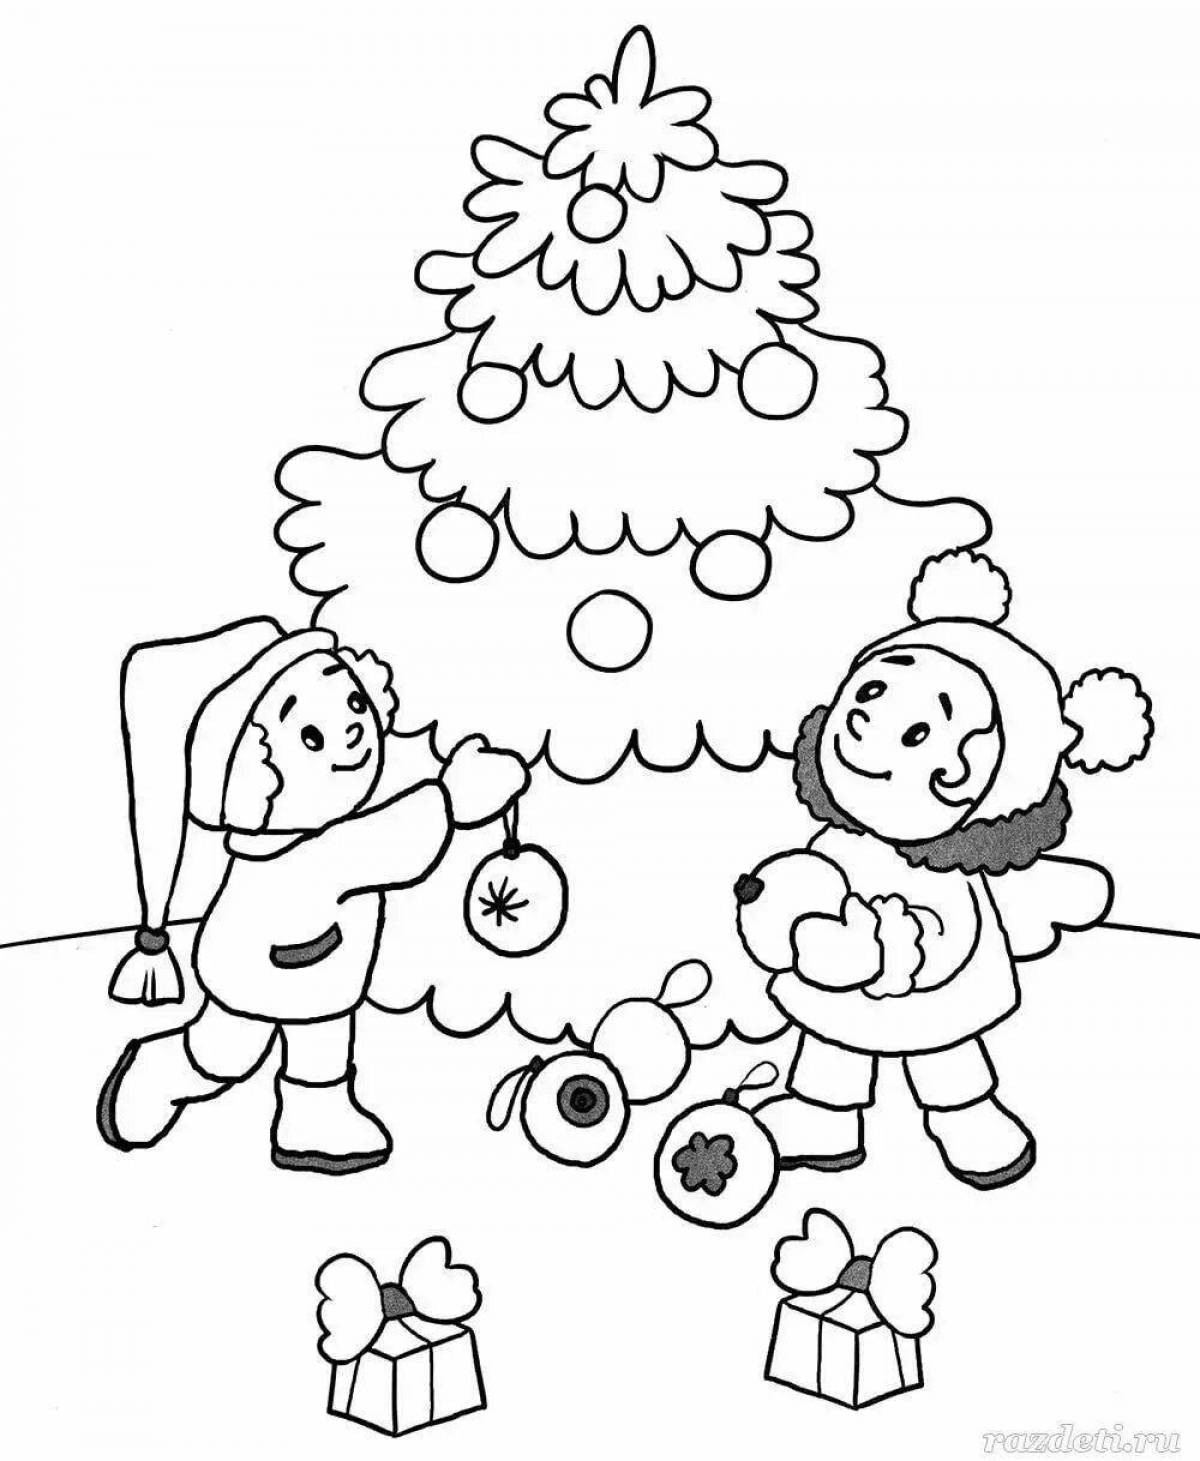 Vivacious coloring page 3 4 years winter